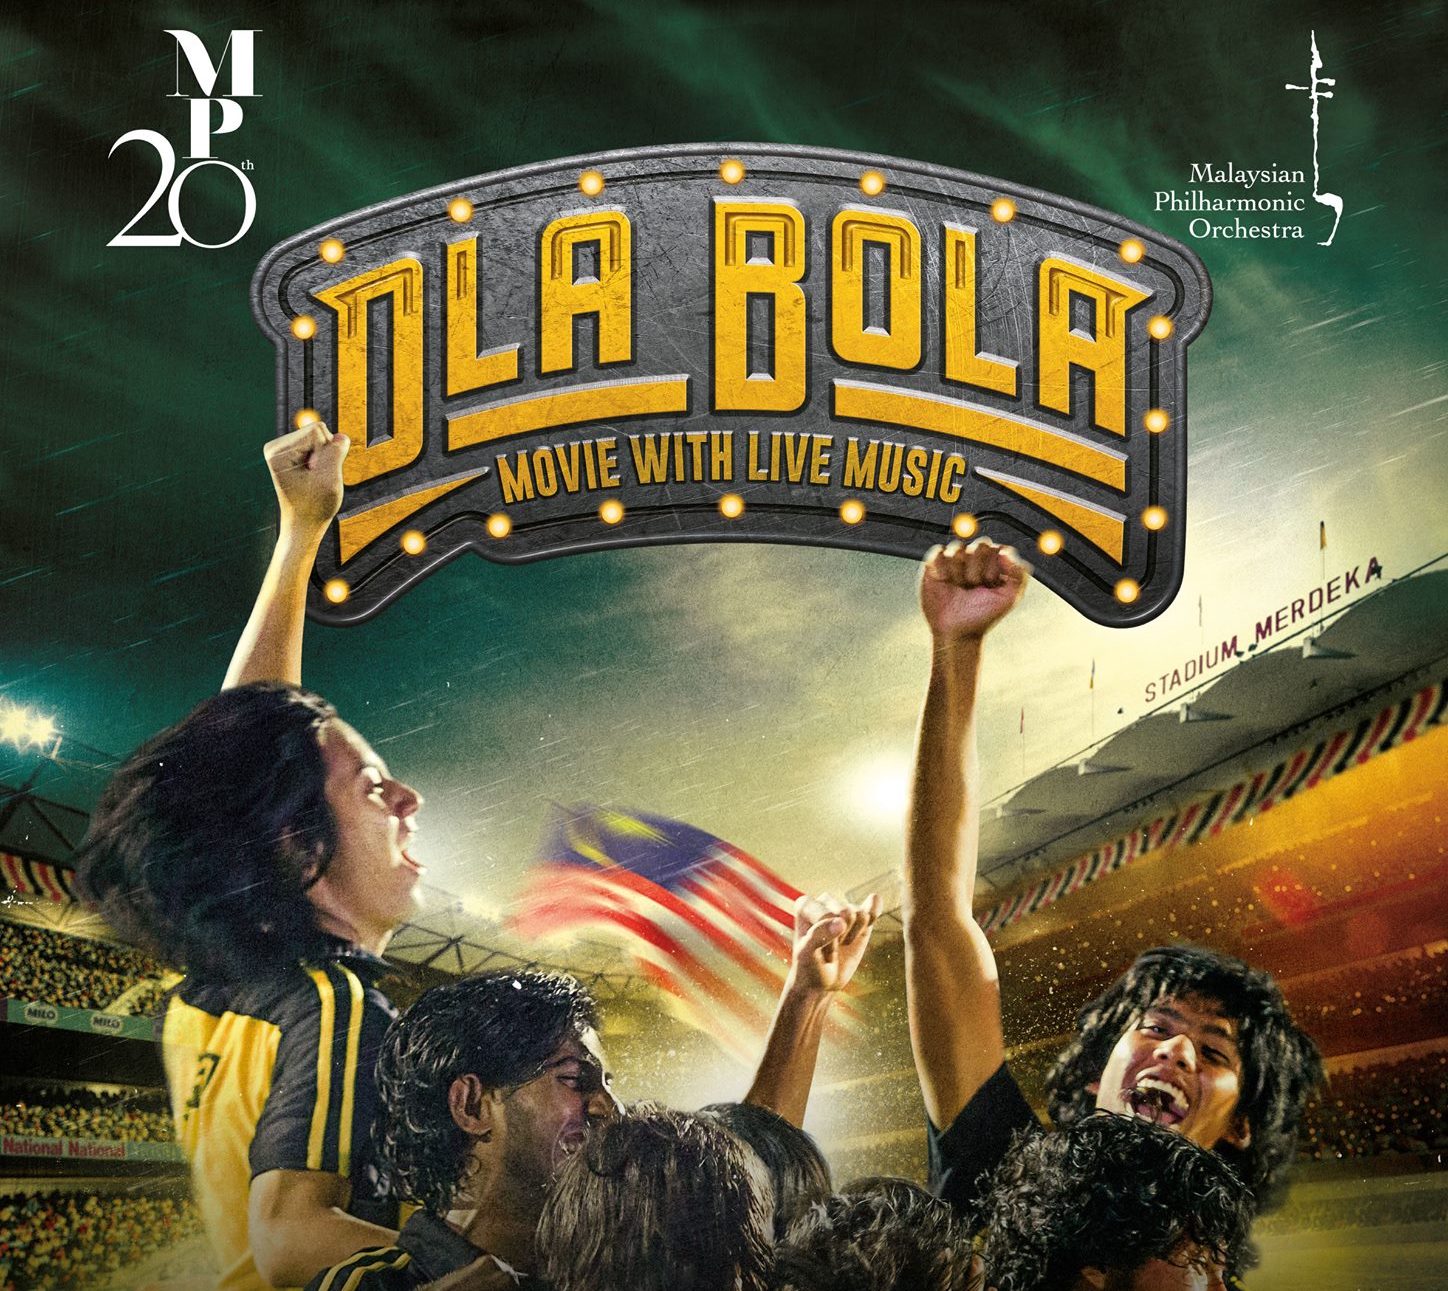 OlaBola Movie With Live Music